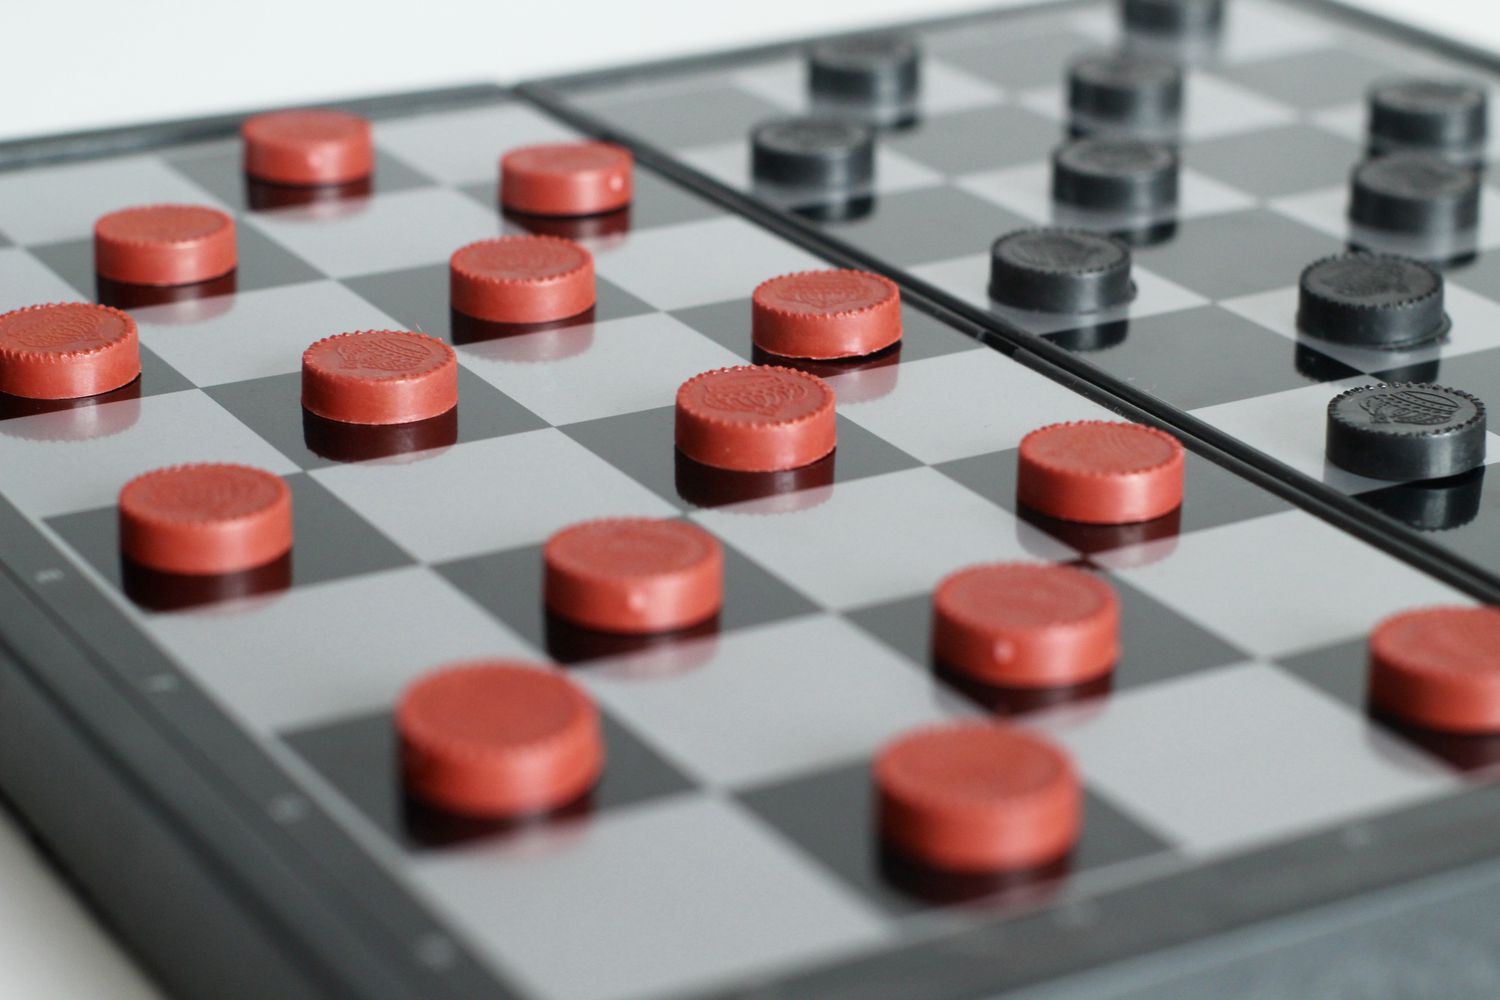 Close-Up Of Checkers Over White Background